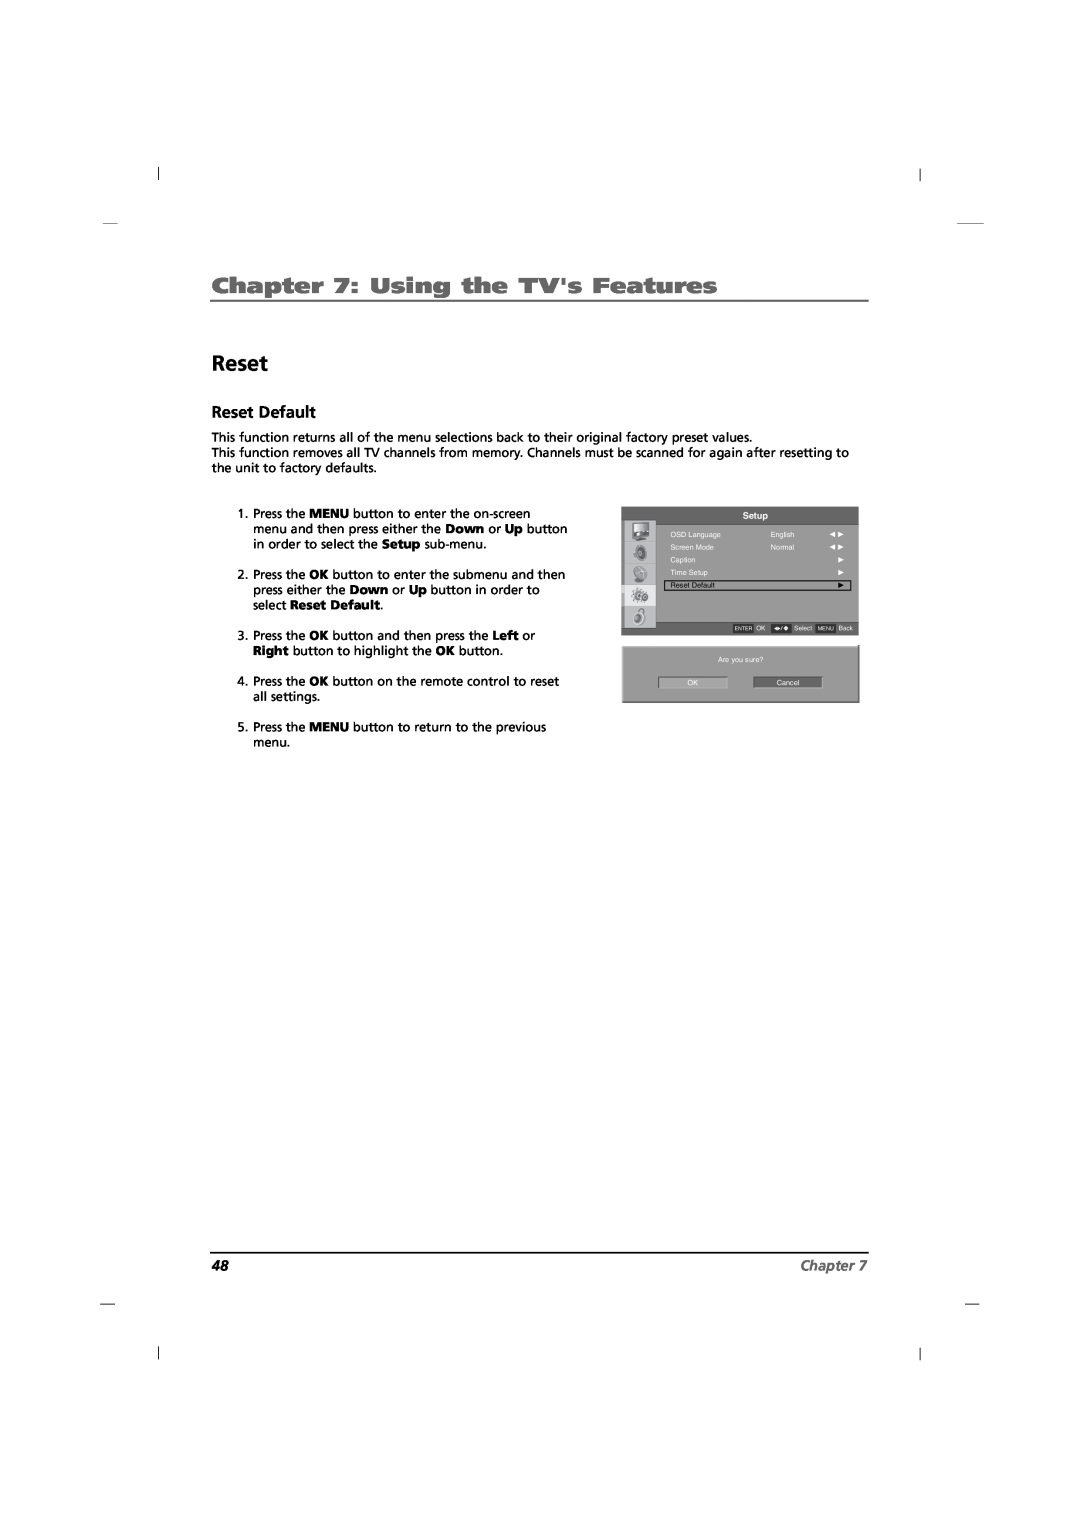 RCA J12H770 manual Reset Default, Using the TVs Features, Chapter 